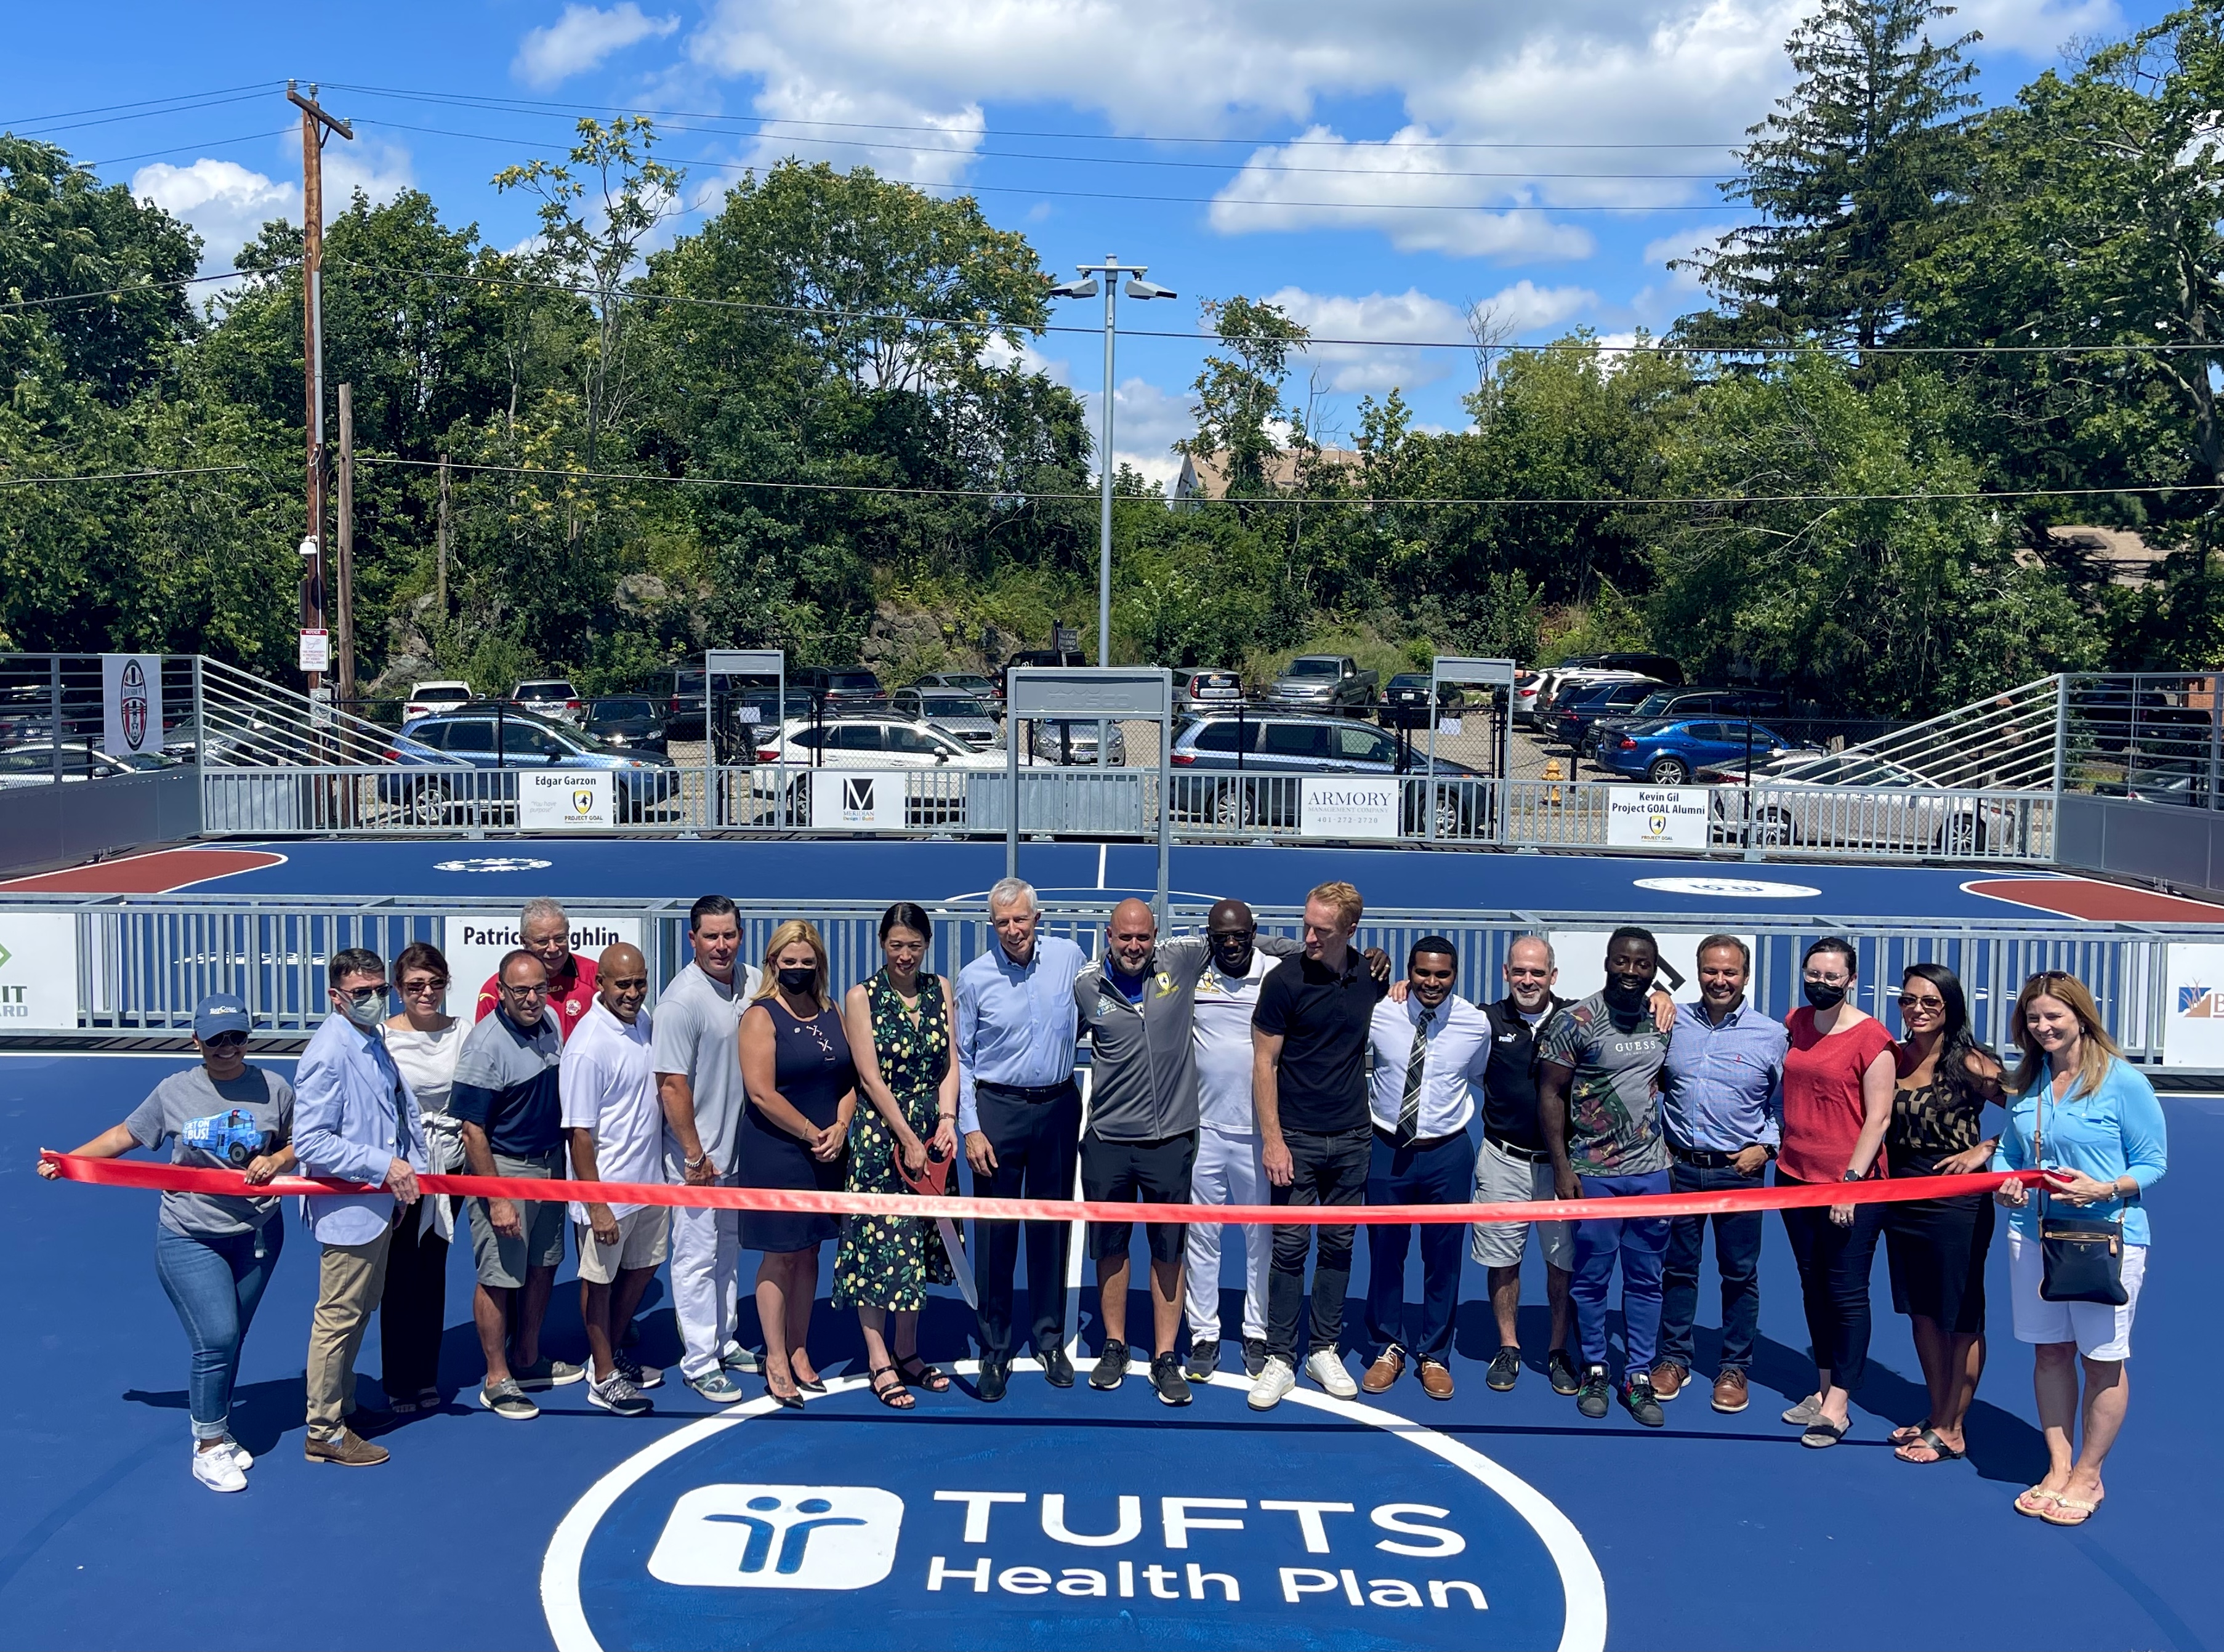 Mount Brings Basketball and Futsal Court to Campus